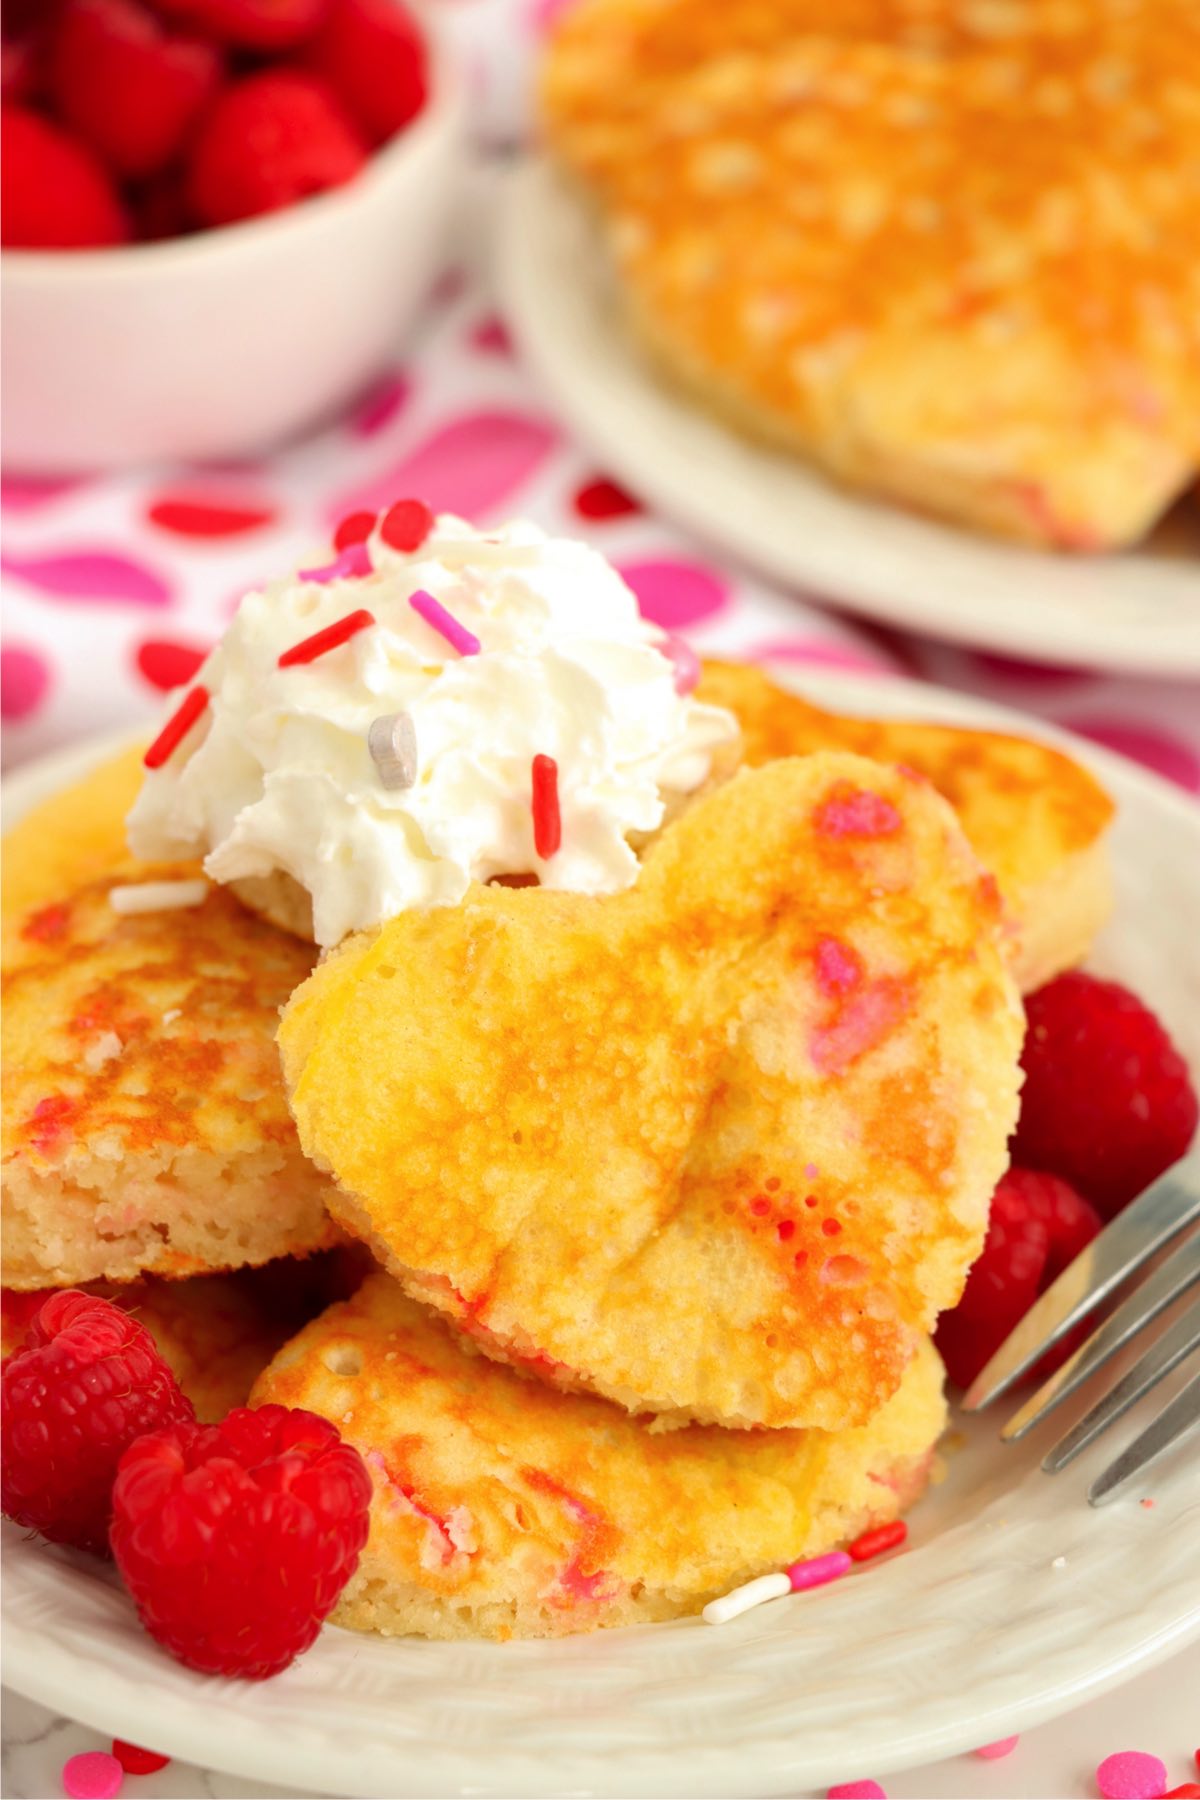 Heart-shaped pancakes filled with sprinkles with raspberries on the side